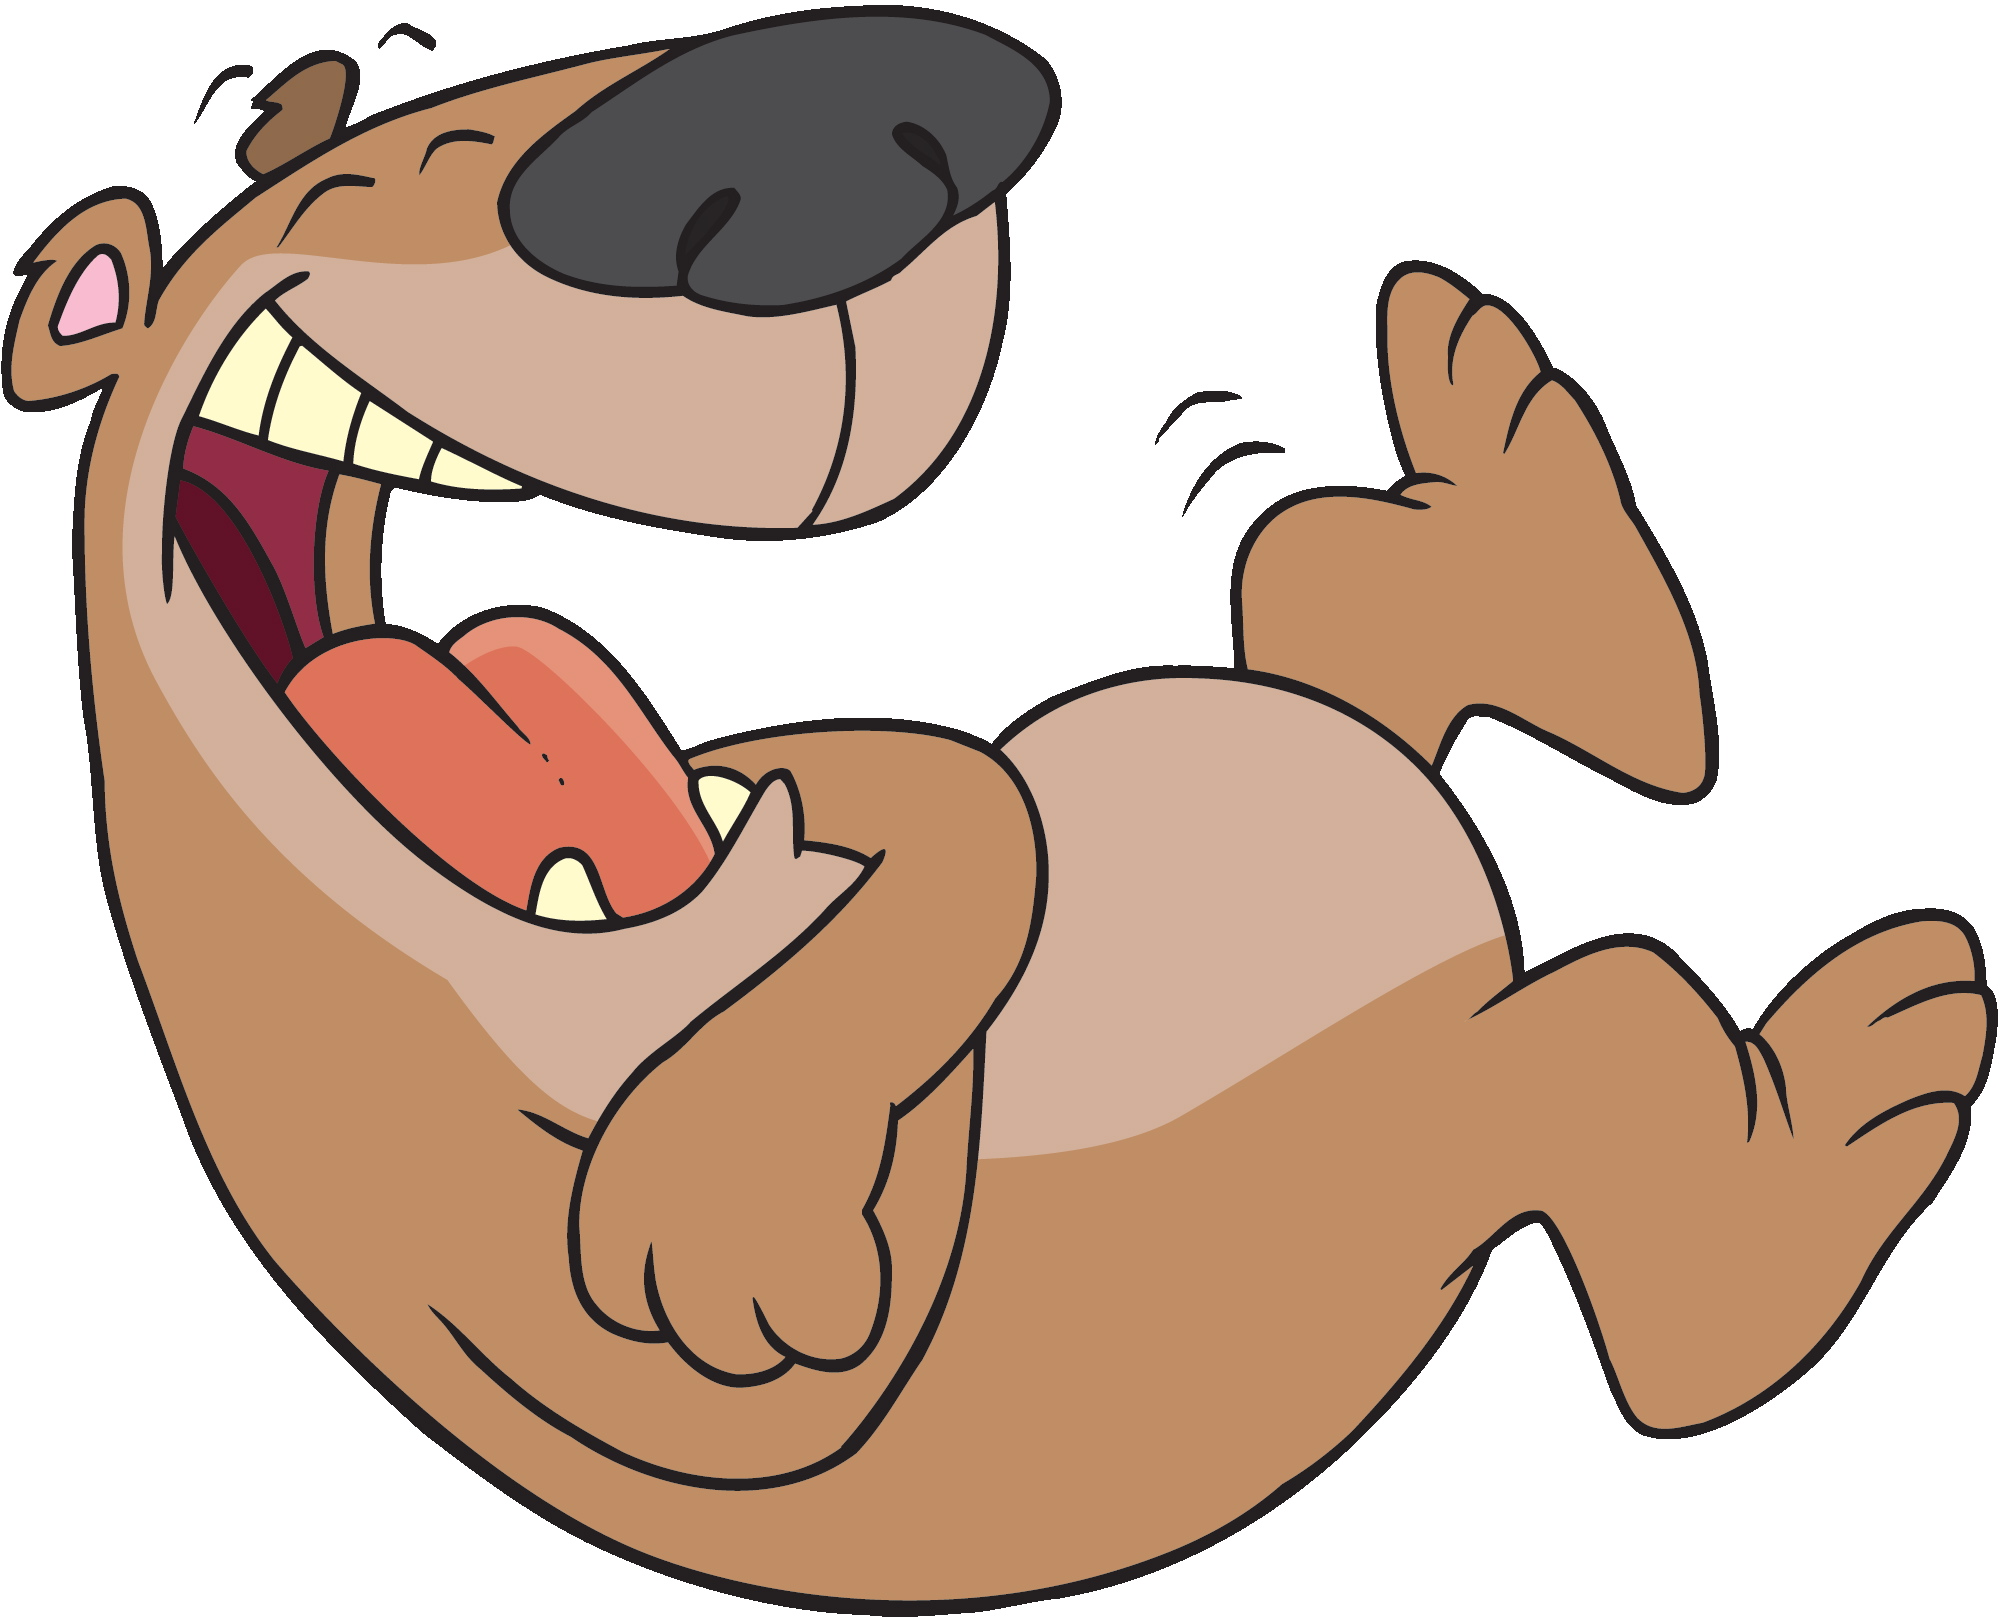 dog laughing clipart - photo #38